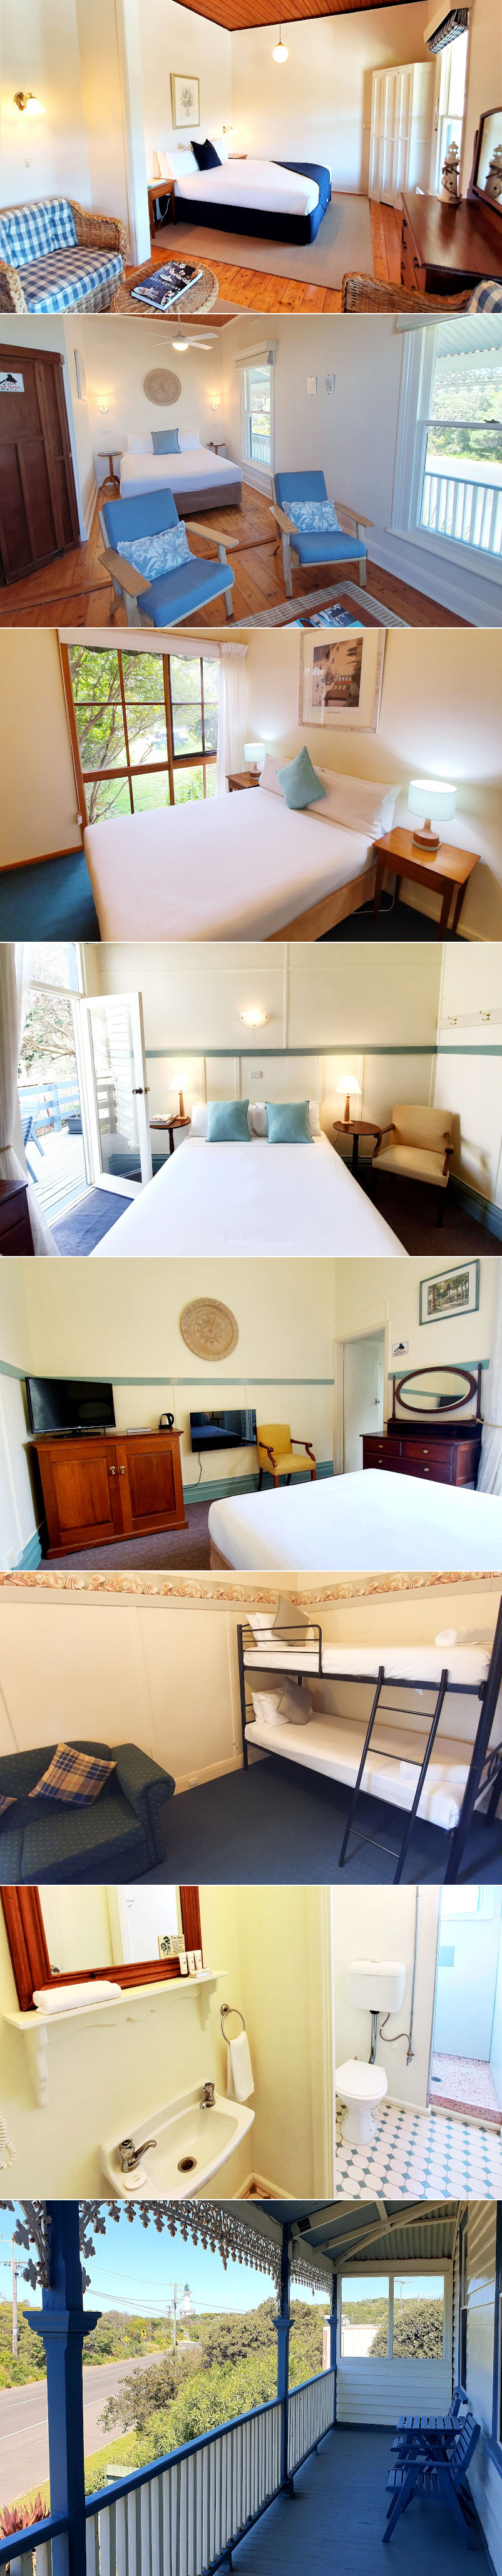 Point Lonsdale Guest House - Guest house rooms